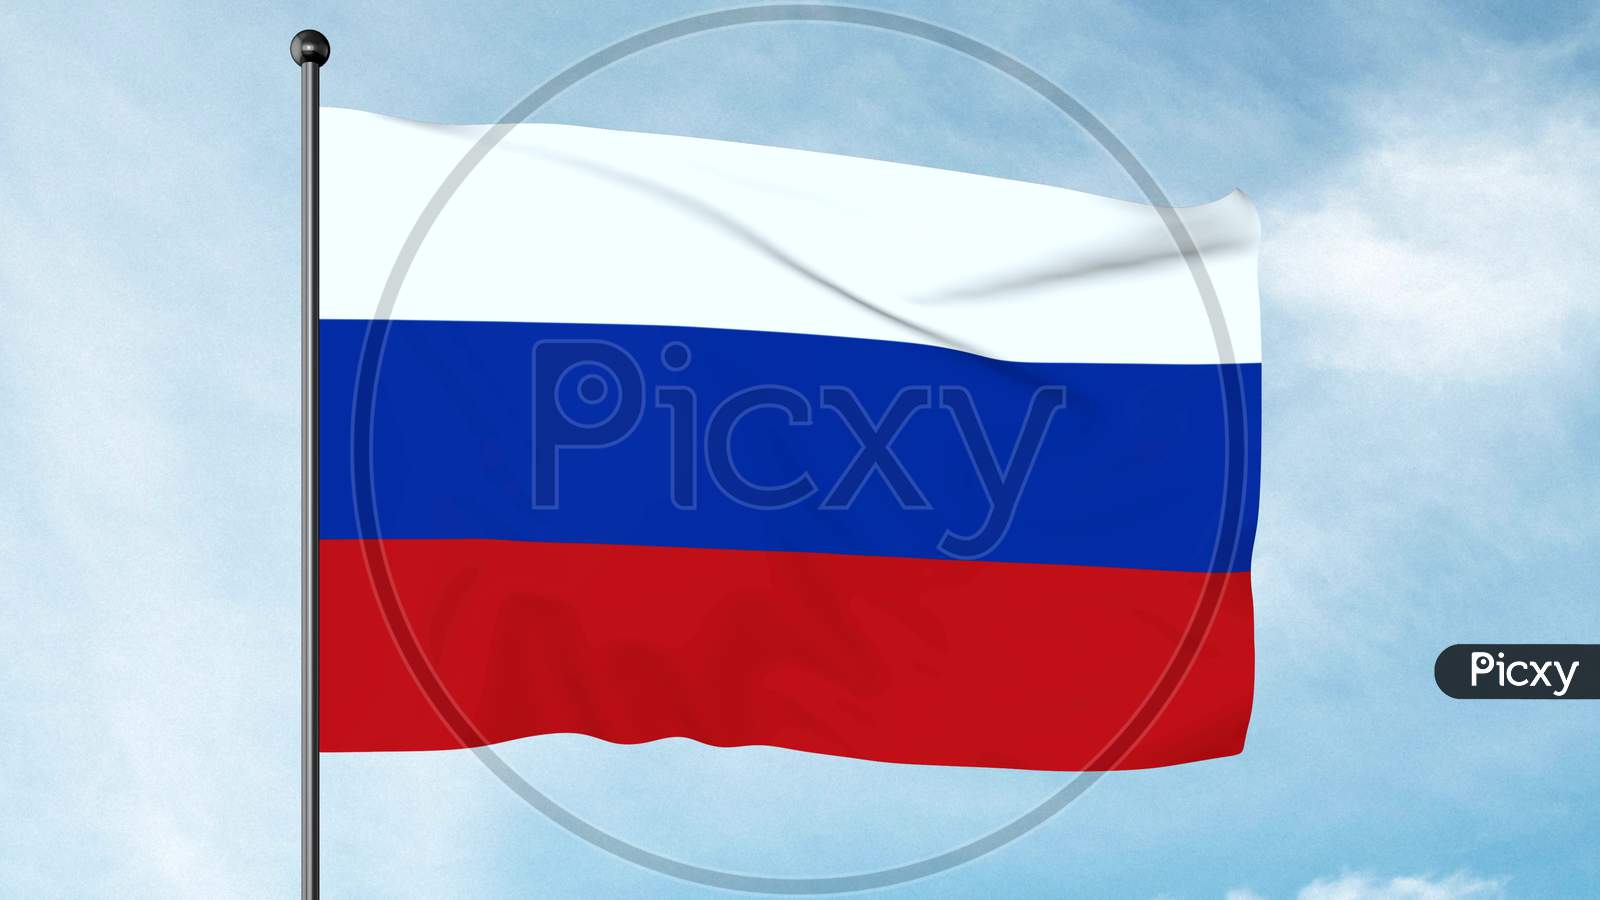 3D Illustration Of The Flag Of The Russian Federation Is A Tricolour Flag Consisting Of Three Equal Horizontal Fields: White On The Top, Blue In The Middle, And Red On The Bottom.